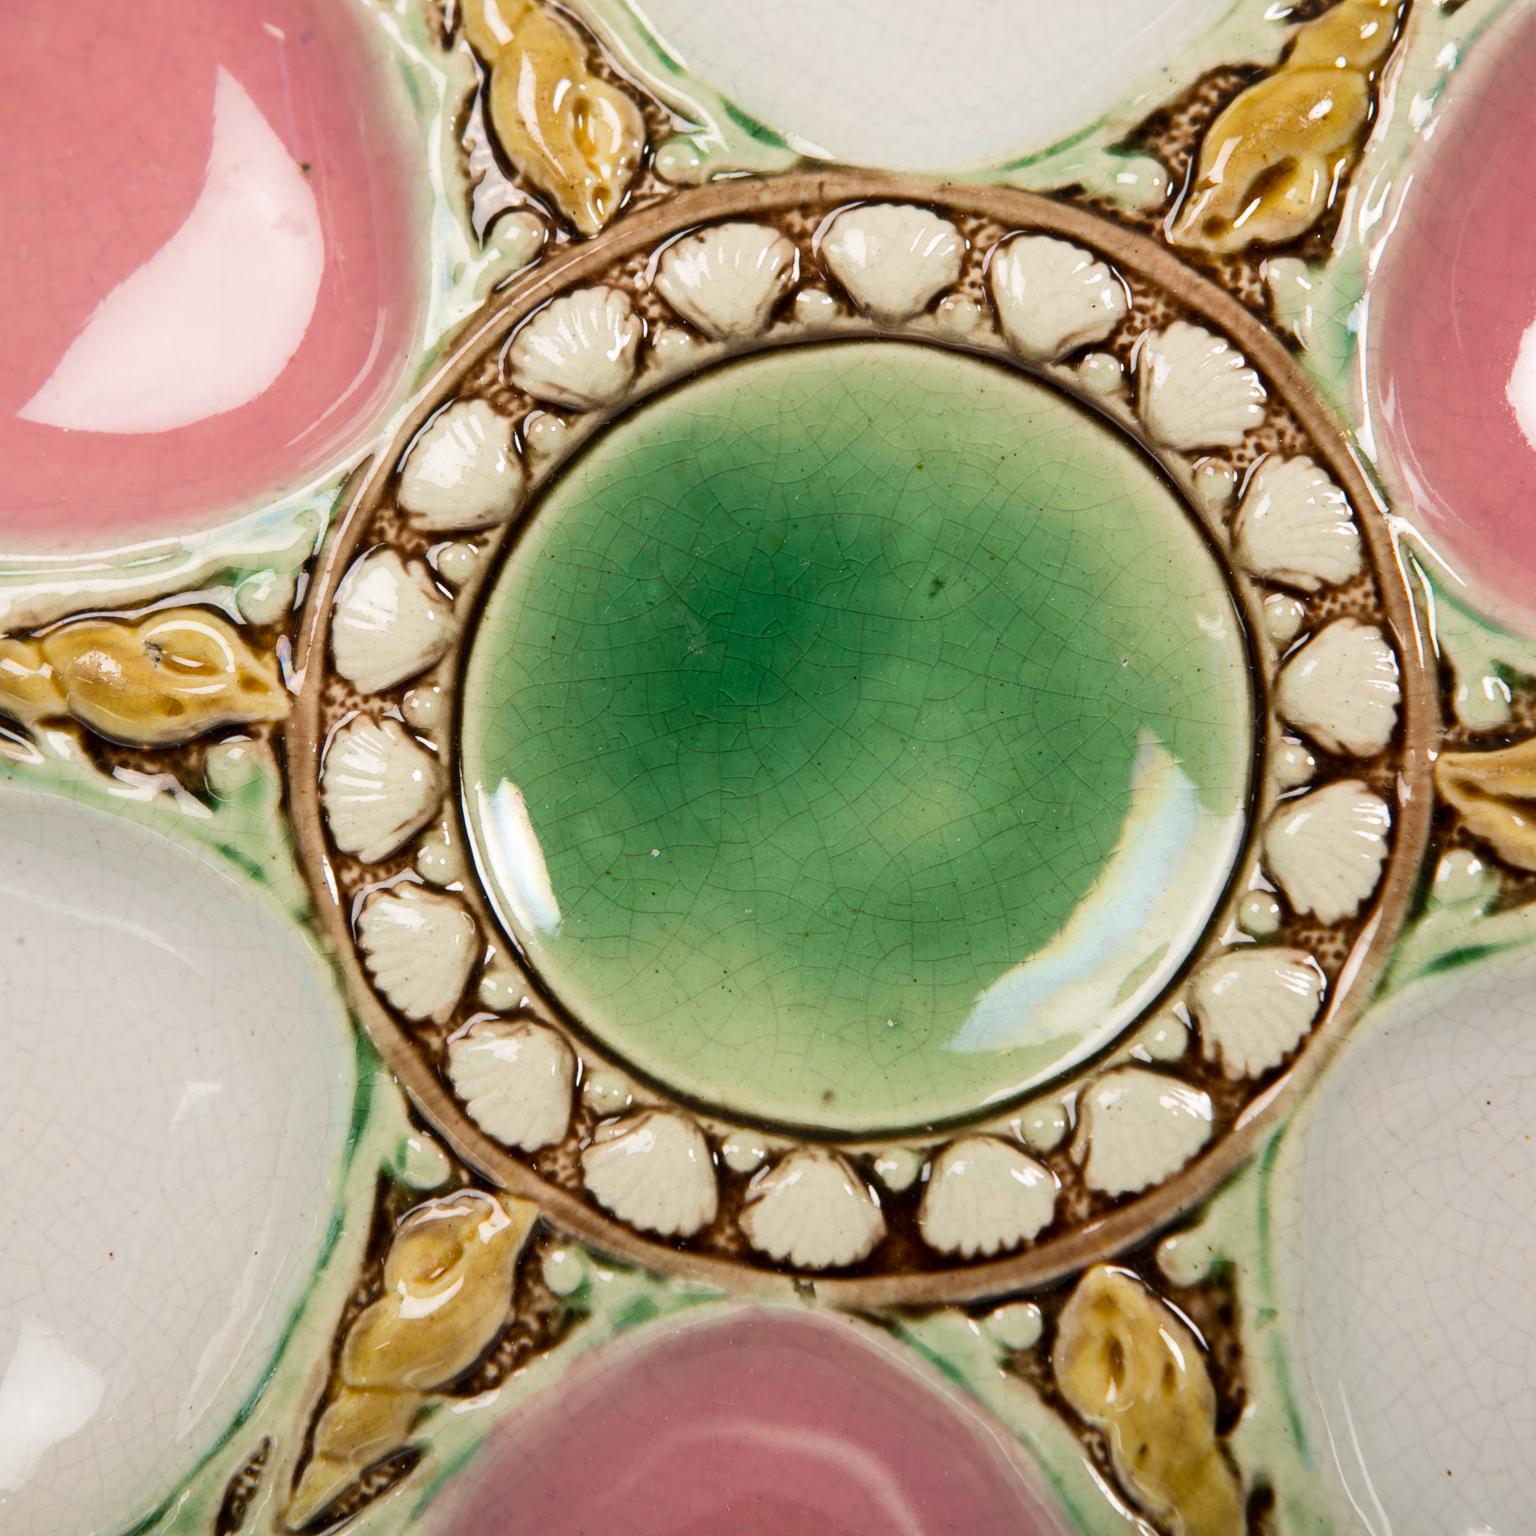 English Majolica Oyster Plate with Sea Shells